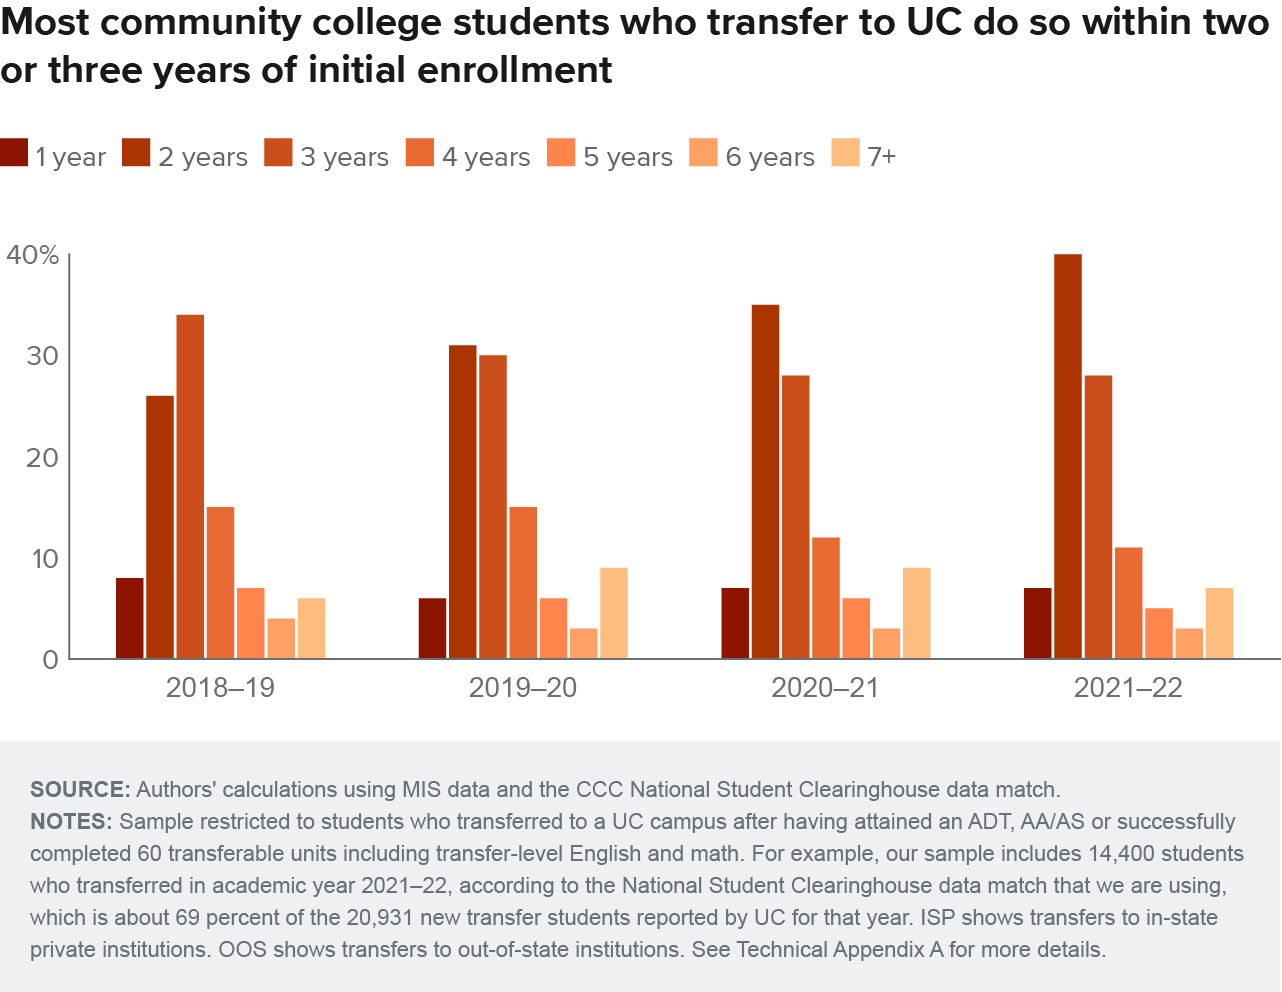 figure 19 - Most community college students who transfer to UC do so within two or three years of initial enrollment